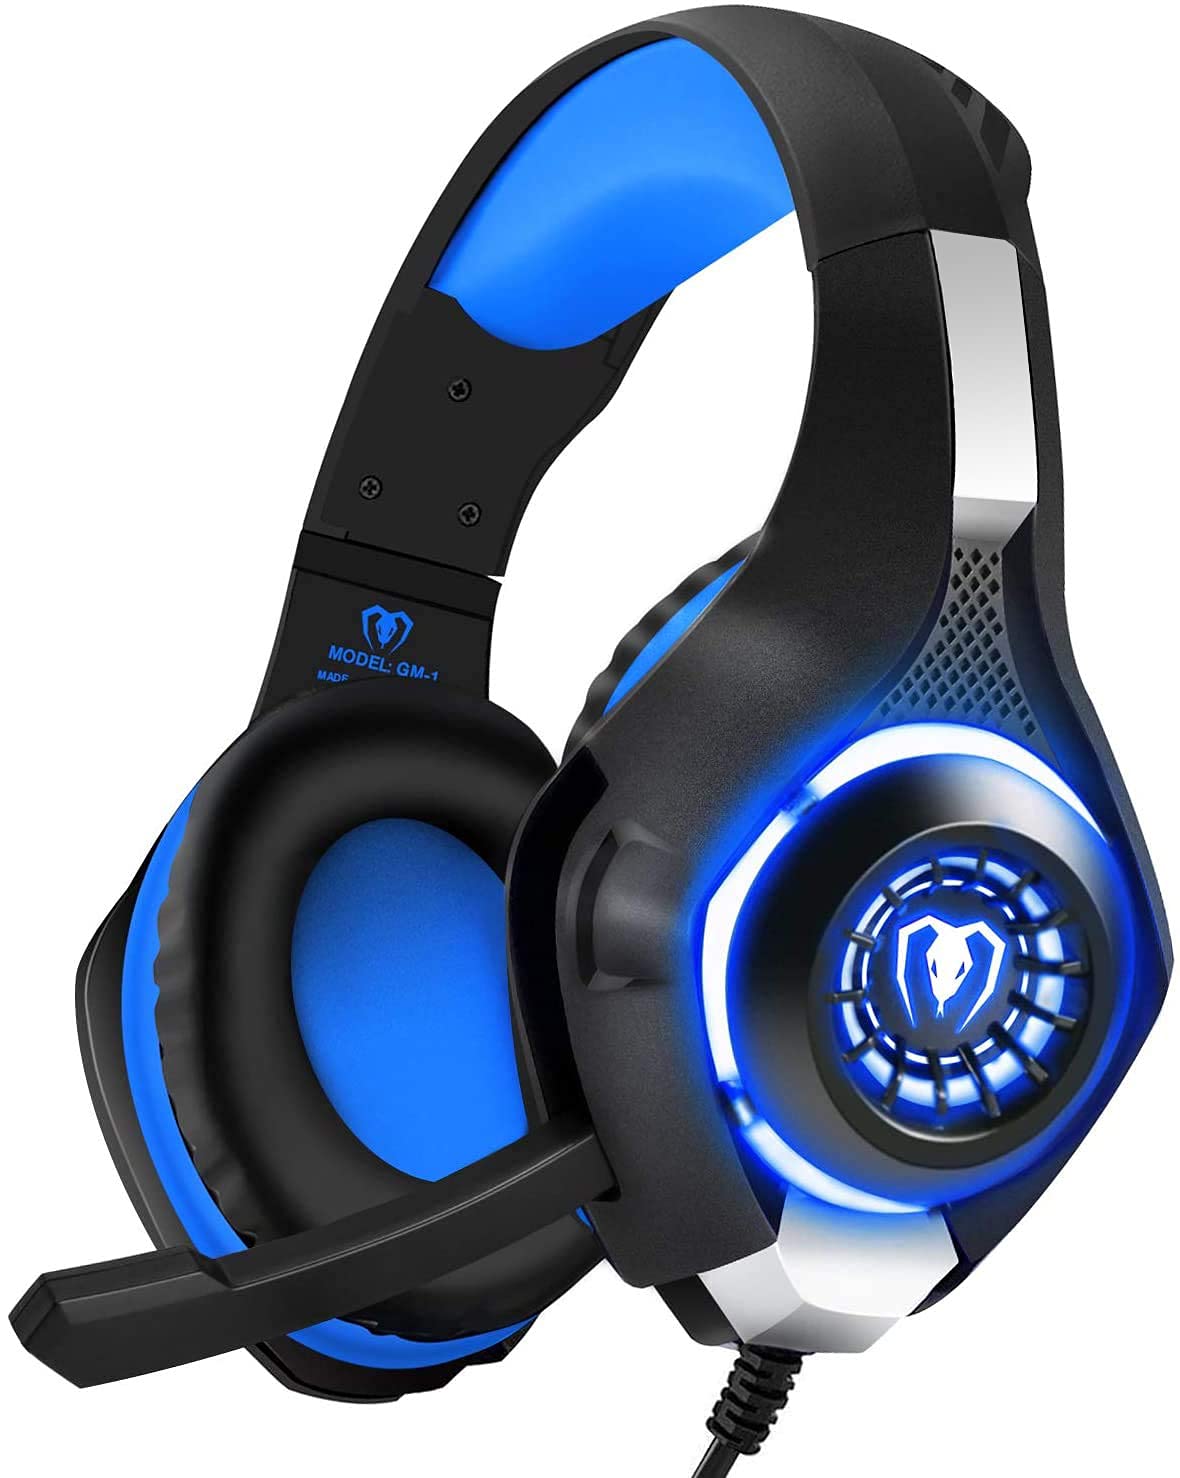 BlueFire Professional 3.5mm PS4 Gaming Headset Headphone with Mic and LED Lights for Playstation 4, Xbox one,Laptop, Computer (Blue)